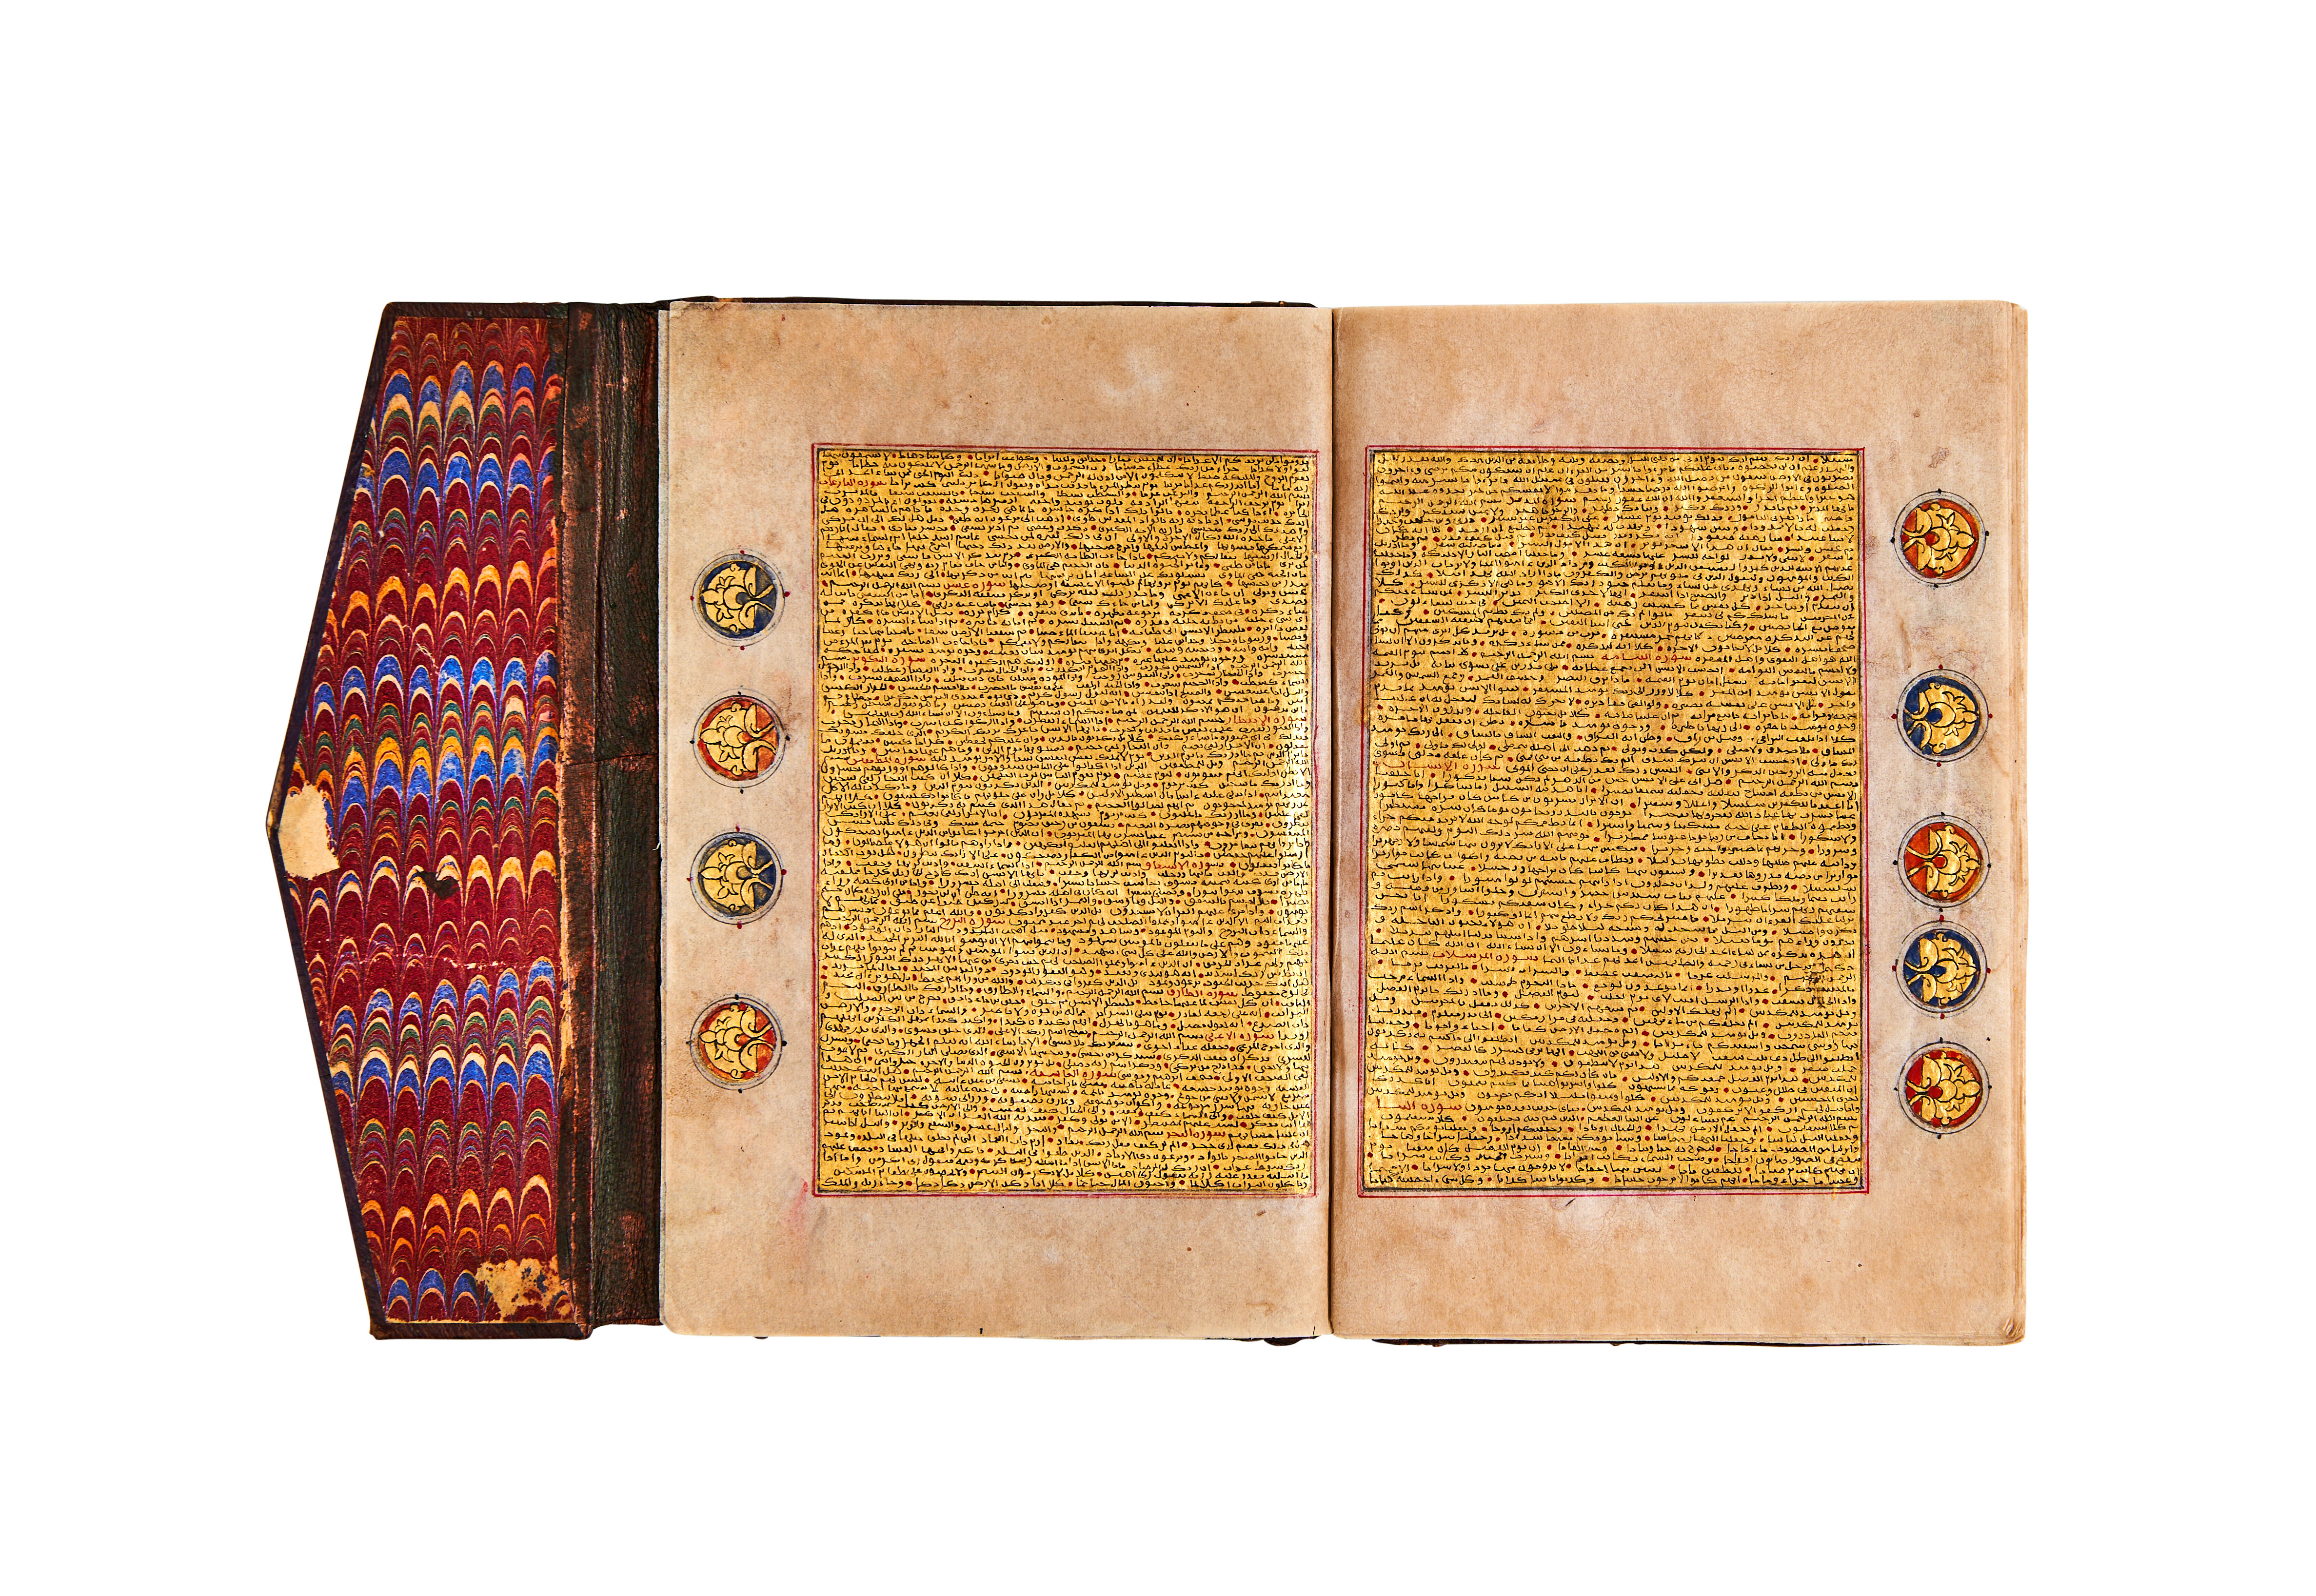 A COMPLETE GOLD MINIATURE QURAN, FOR HIS EXCELLENCE ABU ABDALLAH YUSEF, DATED 1288AH, COPIED BY FAT - Image 7 of 9